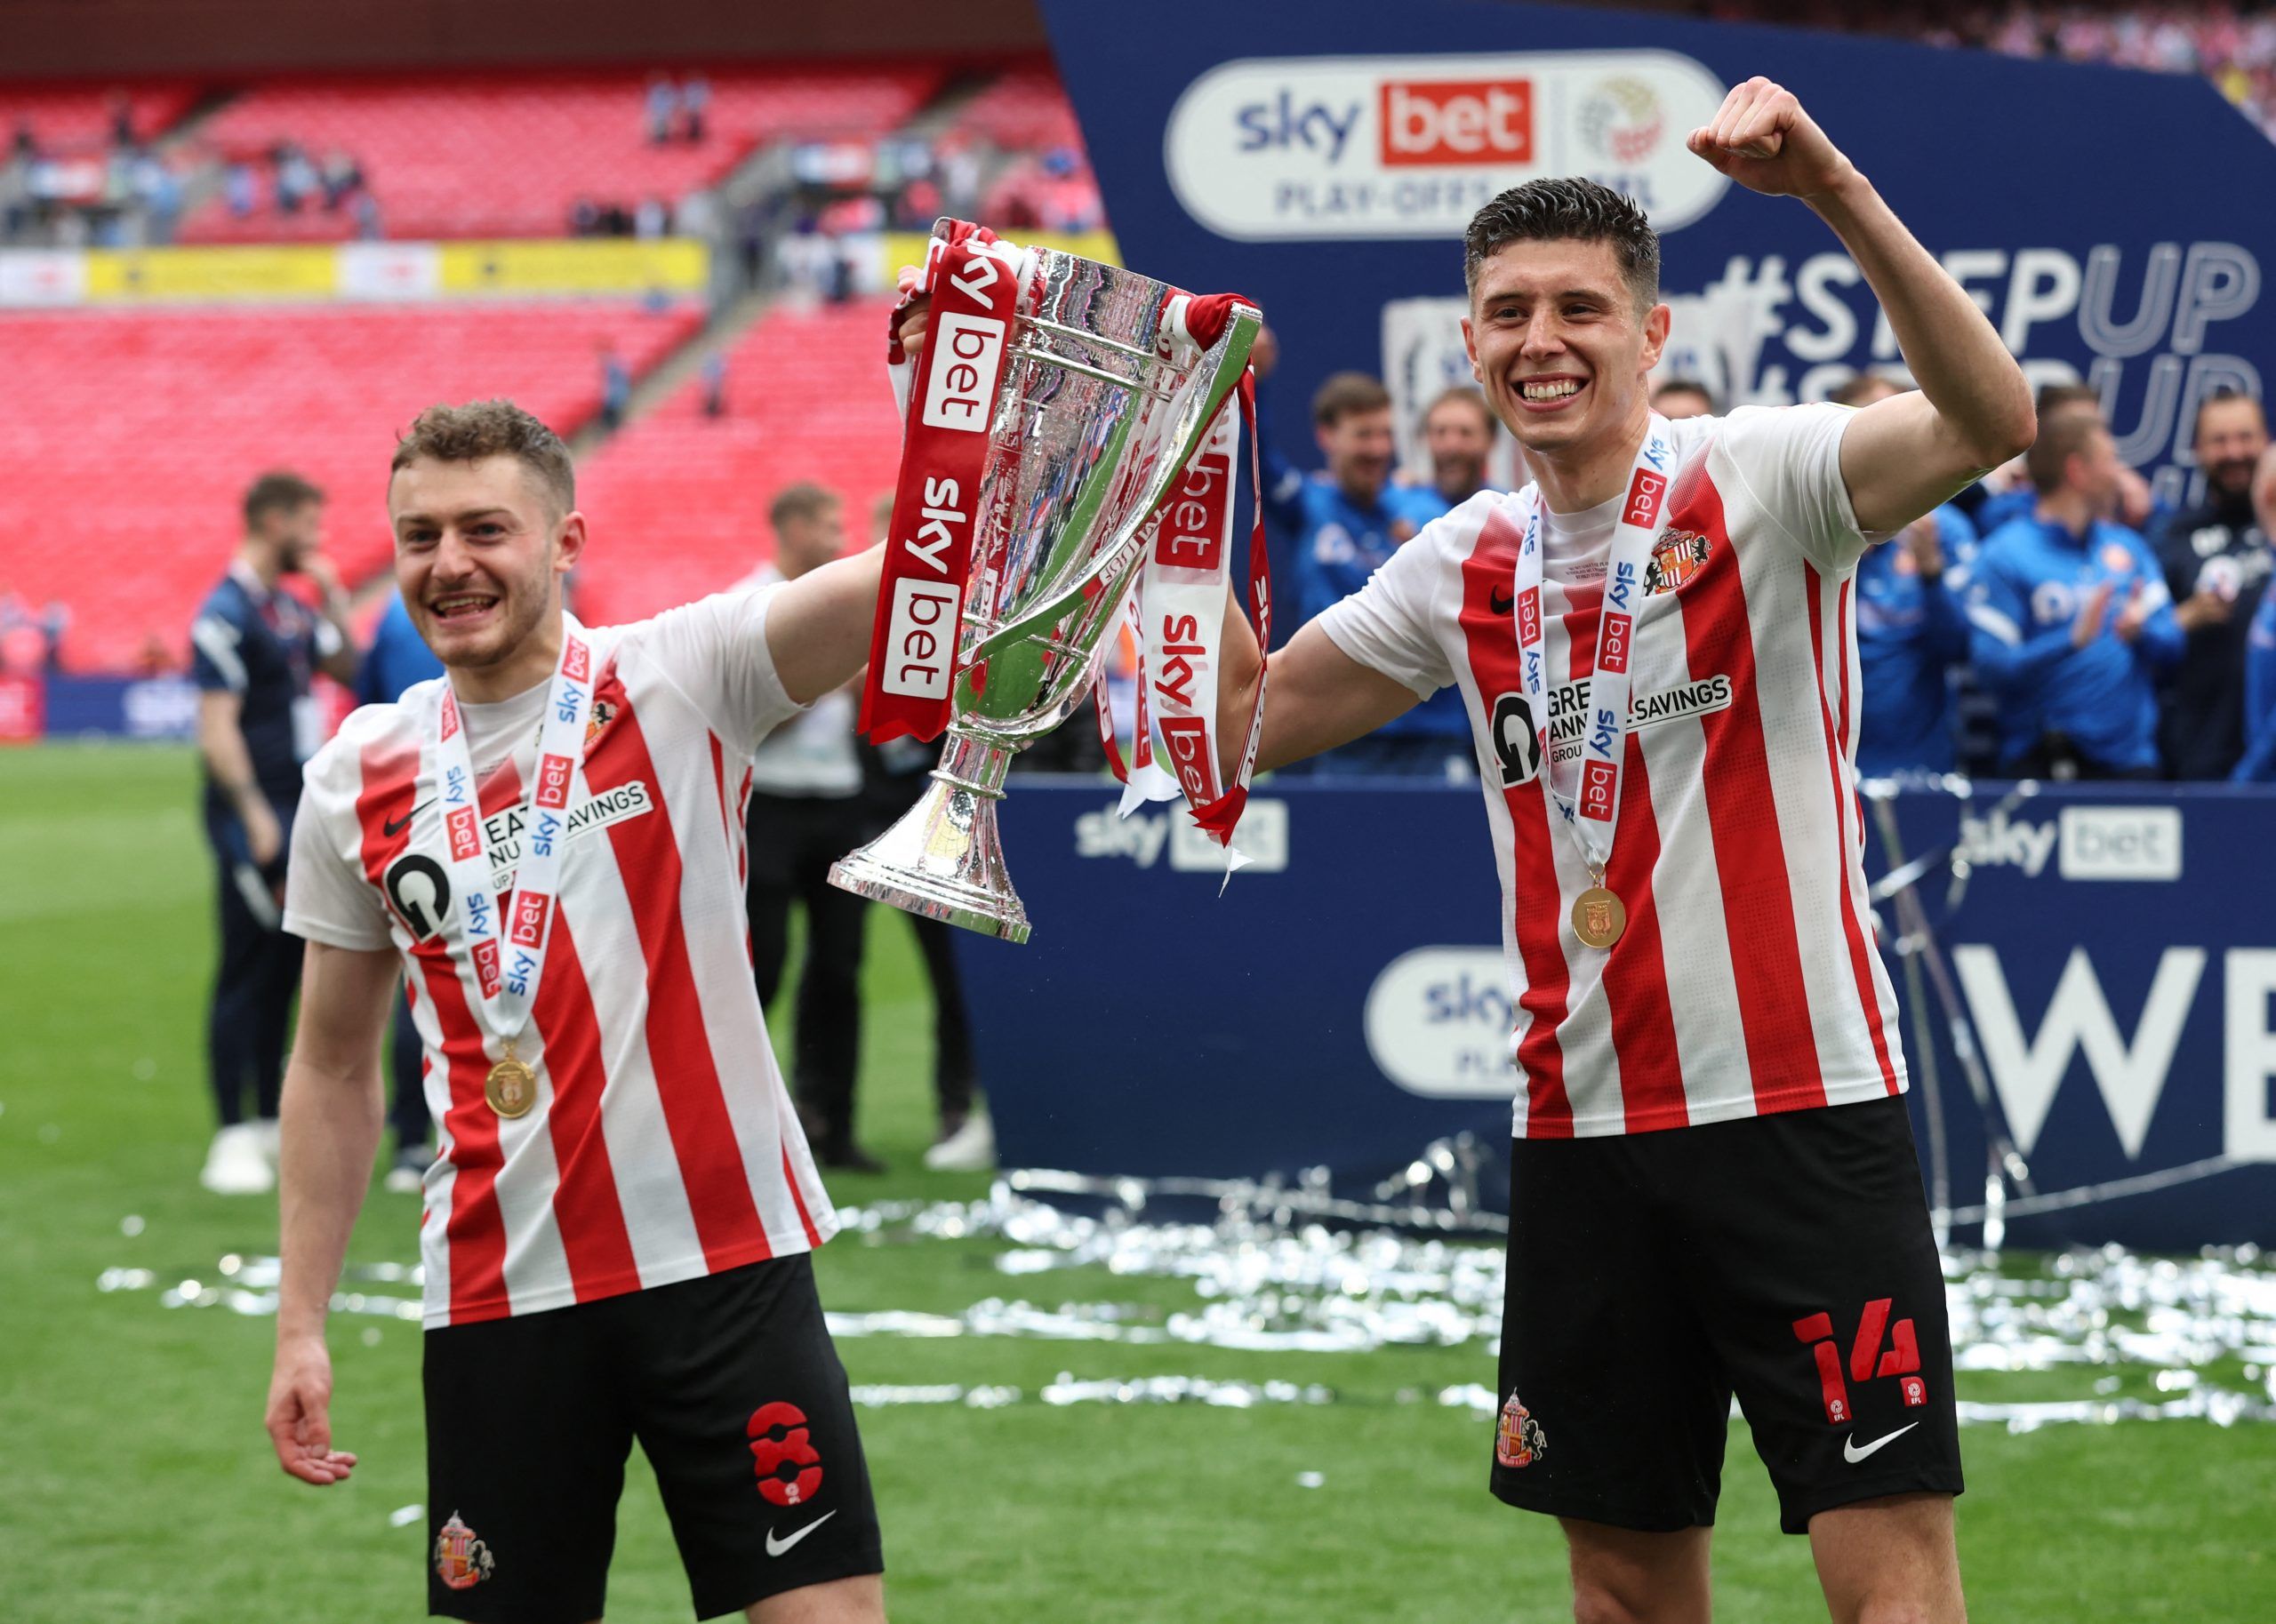 ross-stewart-sunderland-league-one-efl-trophy-alex-neil-charlie-wyke-championship-promotionSoccer Football - League One Play-Off Final - Sunderland v Wycombe Wanderers - Wembley Stadium, London, Britain - May 21, 2022  Sunderland's Elliot Embleton and Ross Stewart celebrate with the trophy after winning the League One Play-Off Action Images/Matthew Childs EDITORIAL USE ONLY. No use with unauthorized audio, video, data, fixture lists, club/league logos or 'live' services. Online in-match use limi